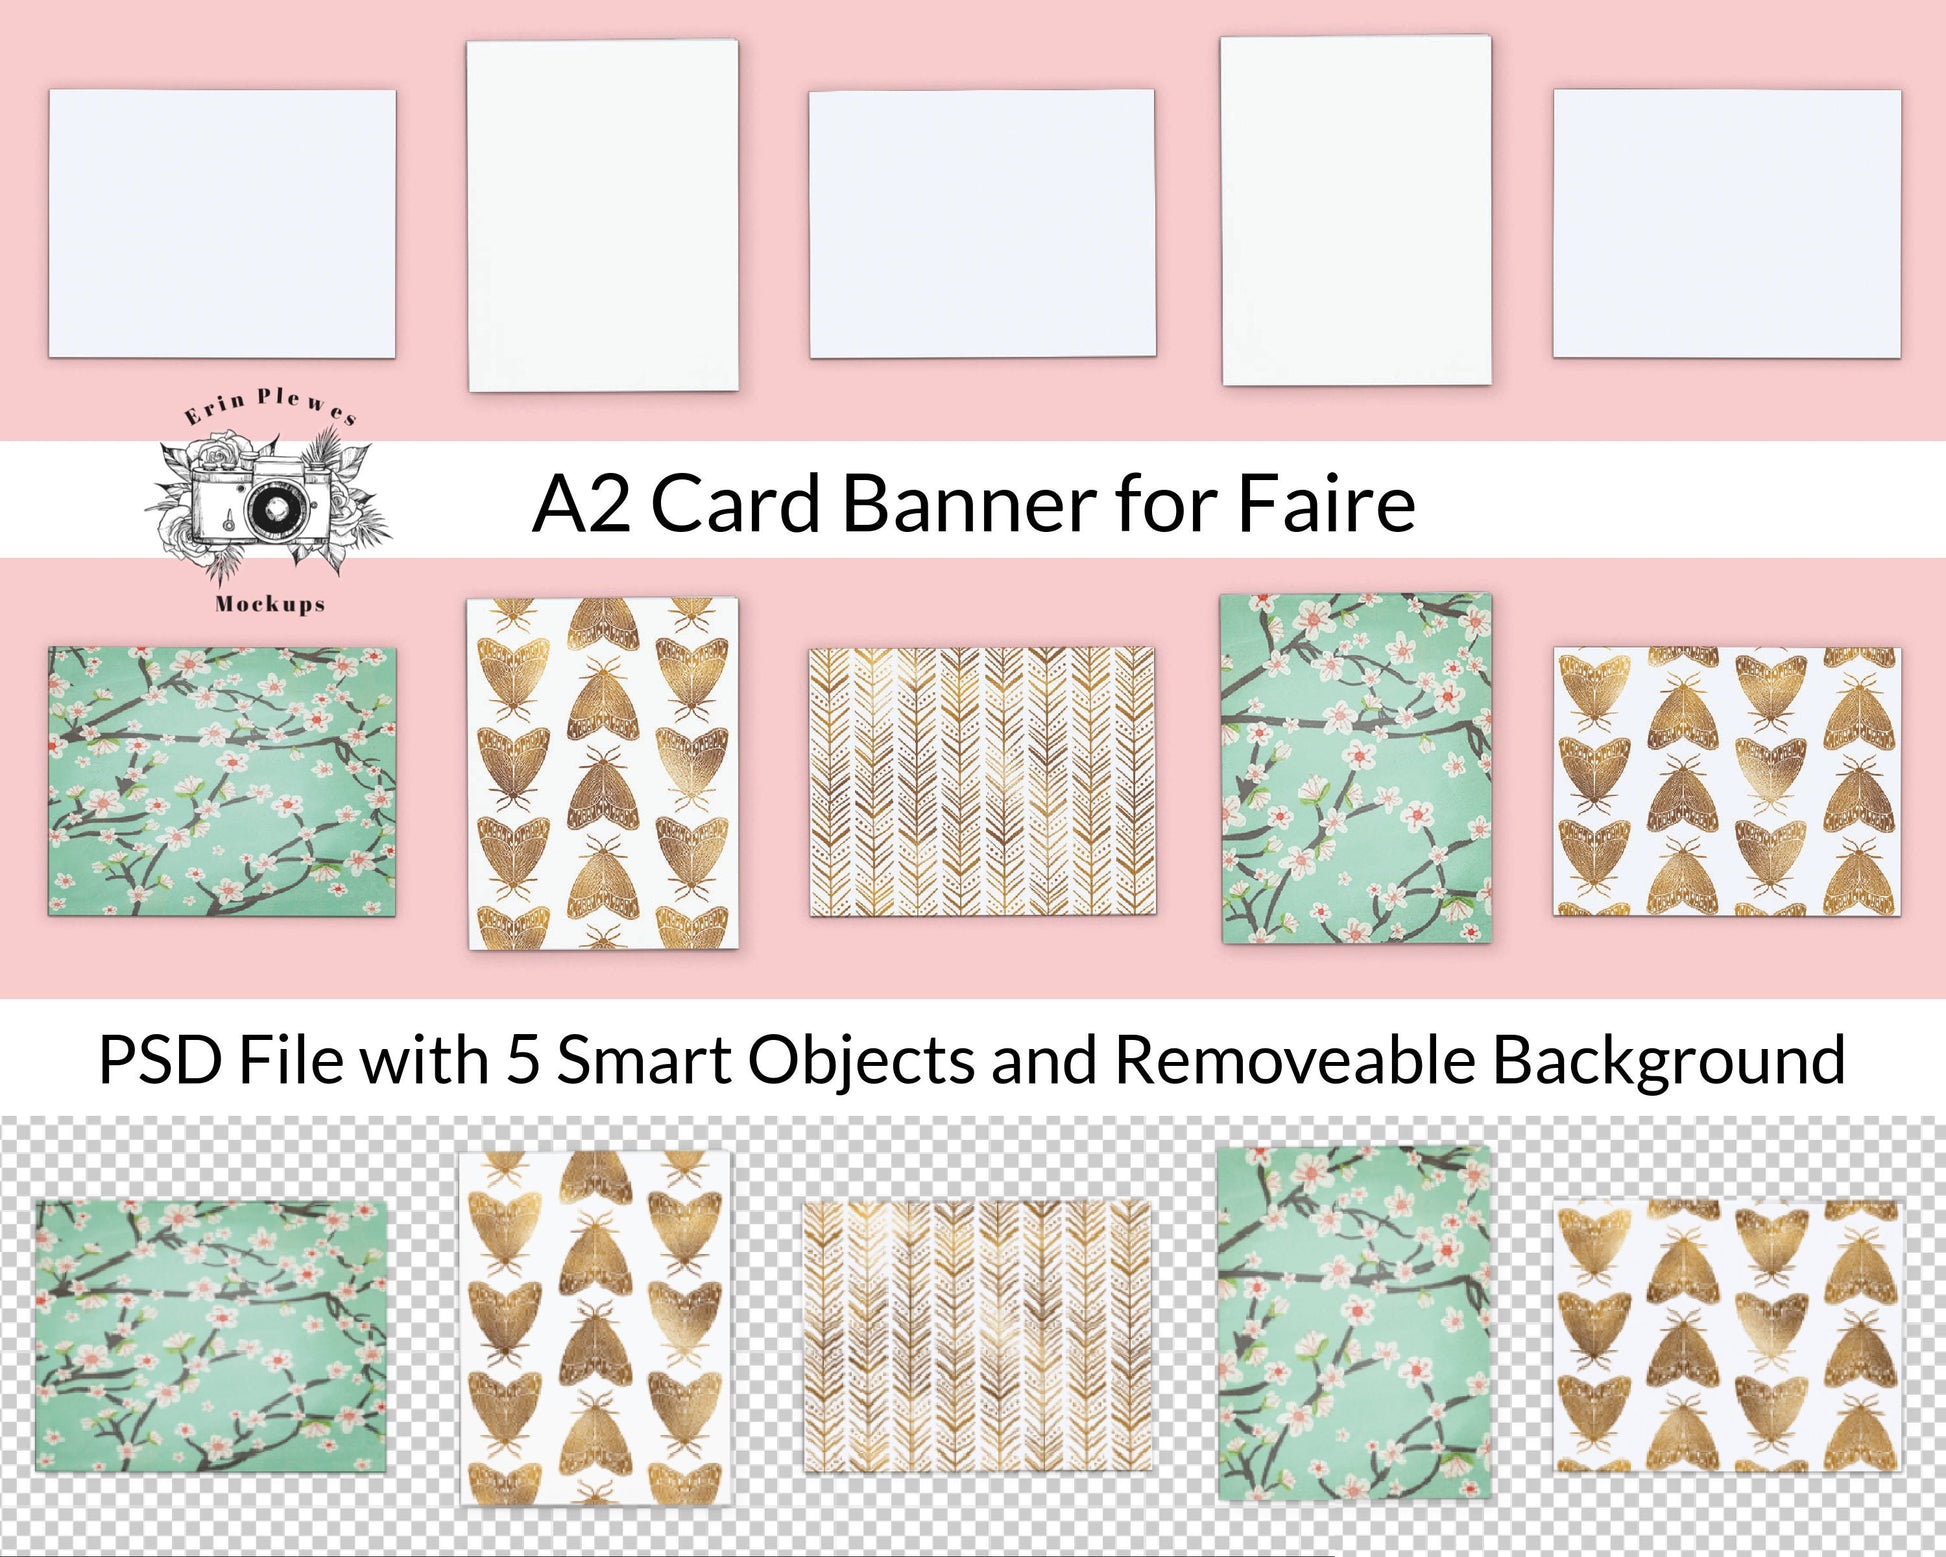 Card Store Faire Banner, Card Shop Banner for Faire with PSD Smart Objects, Shop Branding Graphics, Card Store Branding, Banner Template